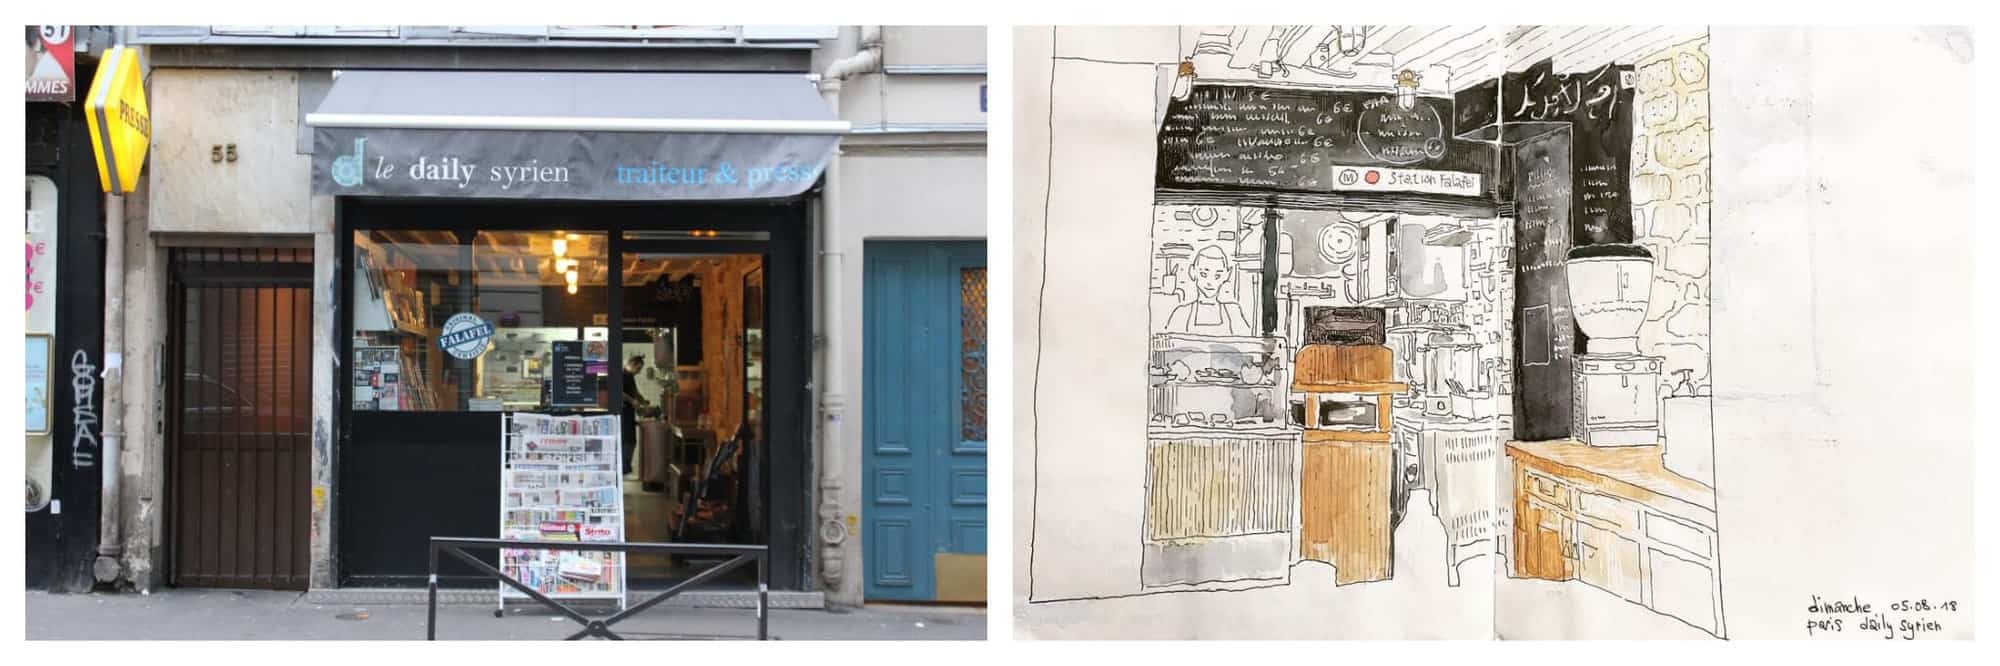 left: the brown coloured exterior of le daily syrien. right: a sketch of the interior of le daily syrien 